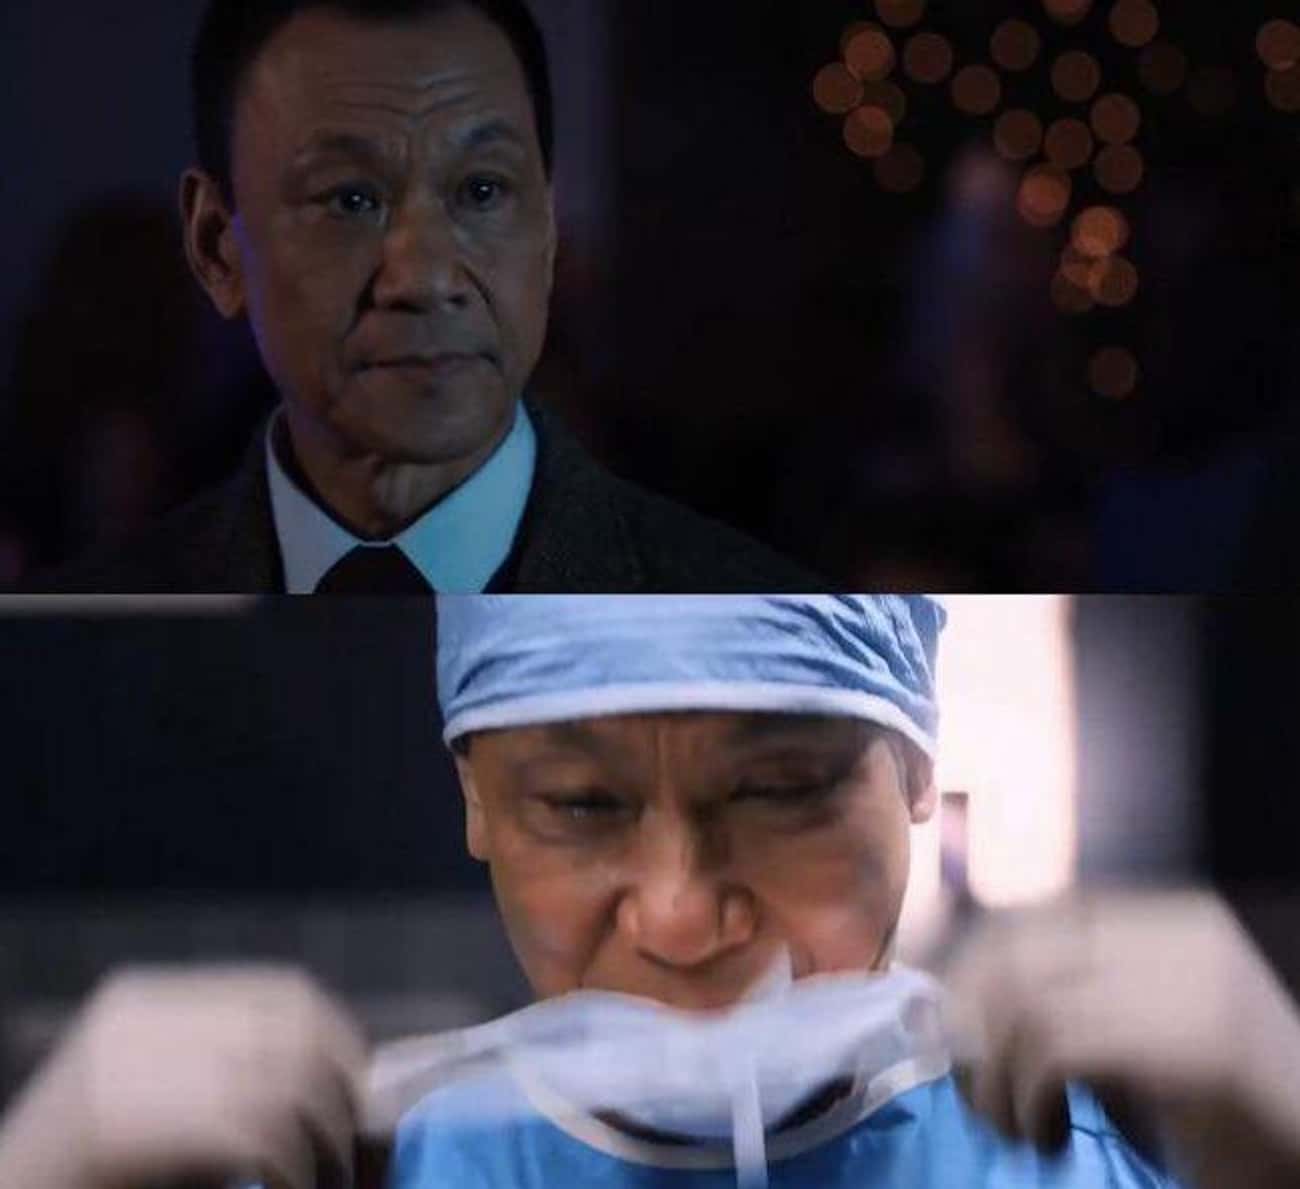 Tony Ignores His Future Surgeon At The Beginning Of 'Iron Man 3'